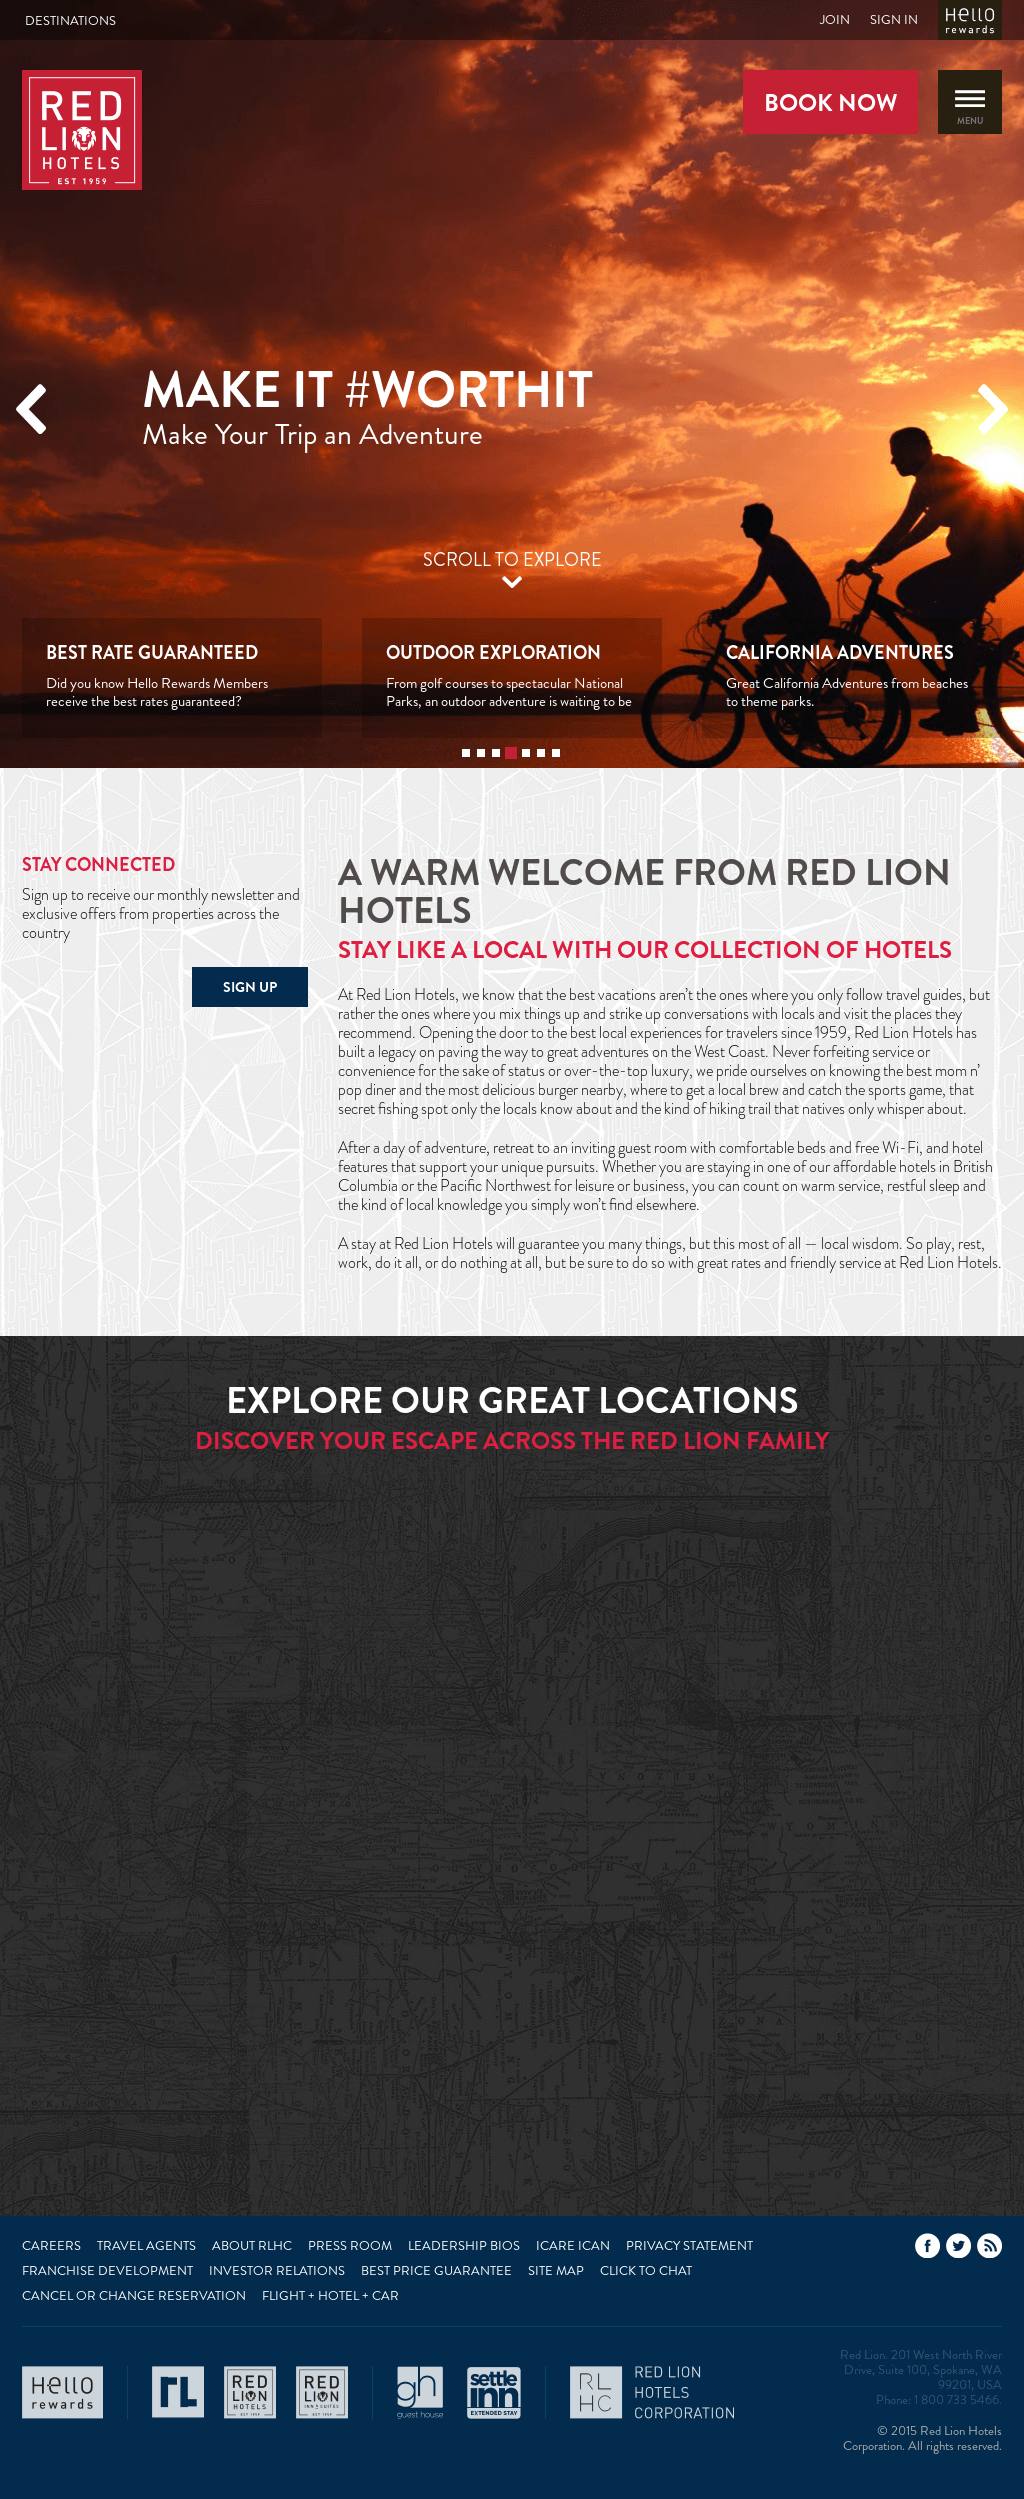 Red Lion Hotels Corporation Logo - Red Lion Competitors, Revenue and Employees - Owler Company Profile